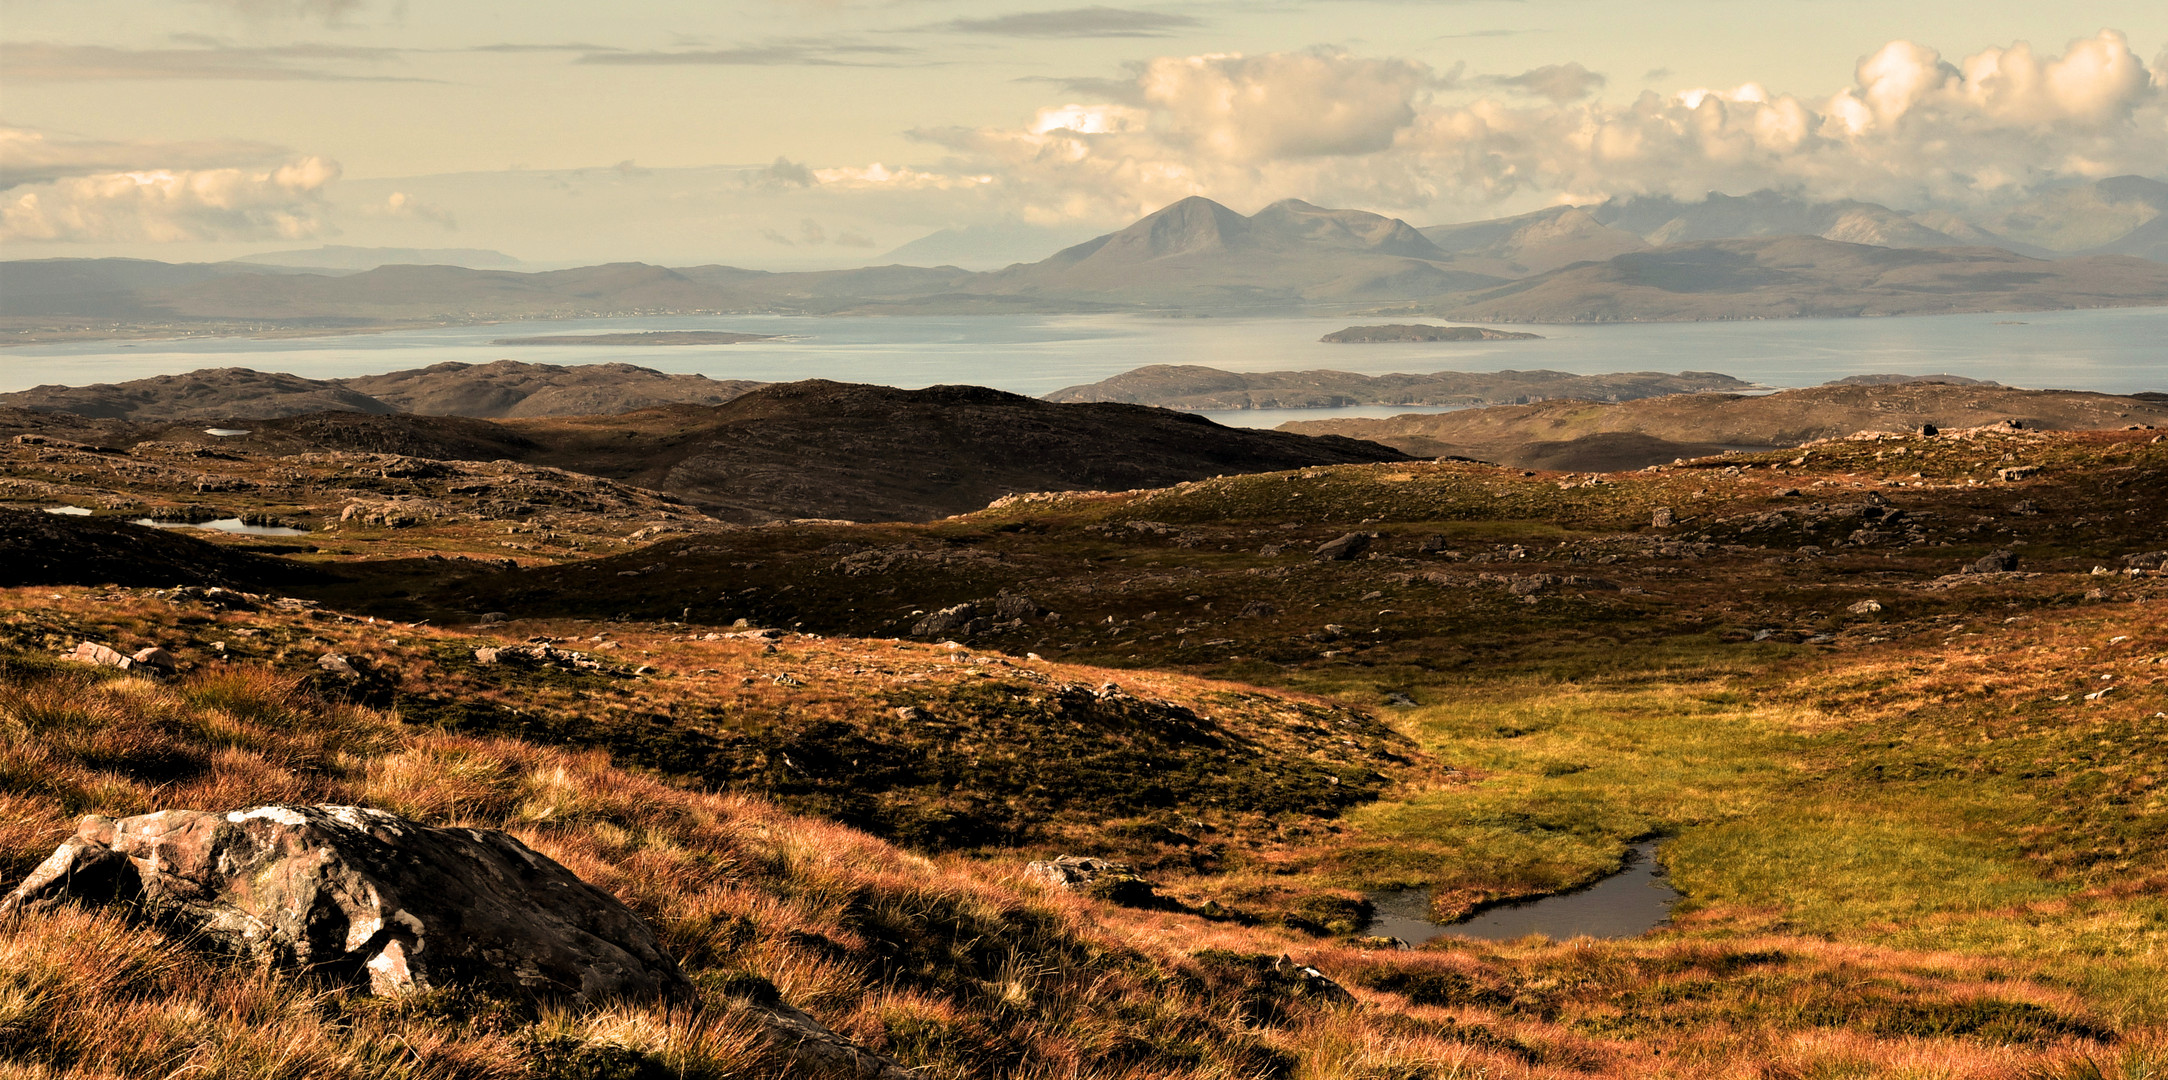 View of the Isle of Skye from Applecross Peninsula